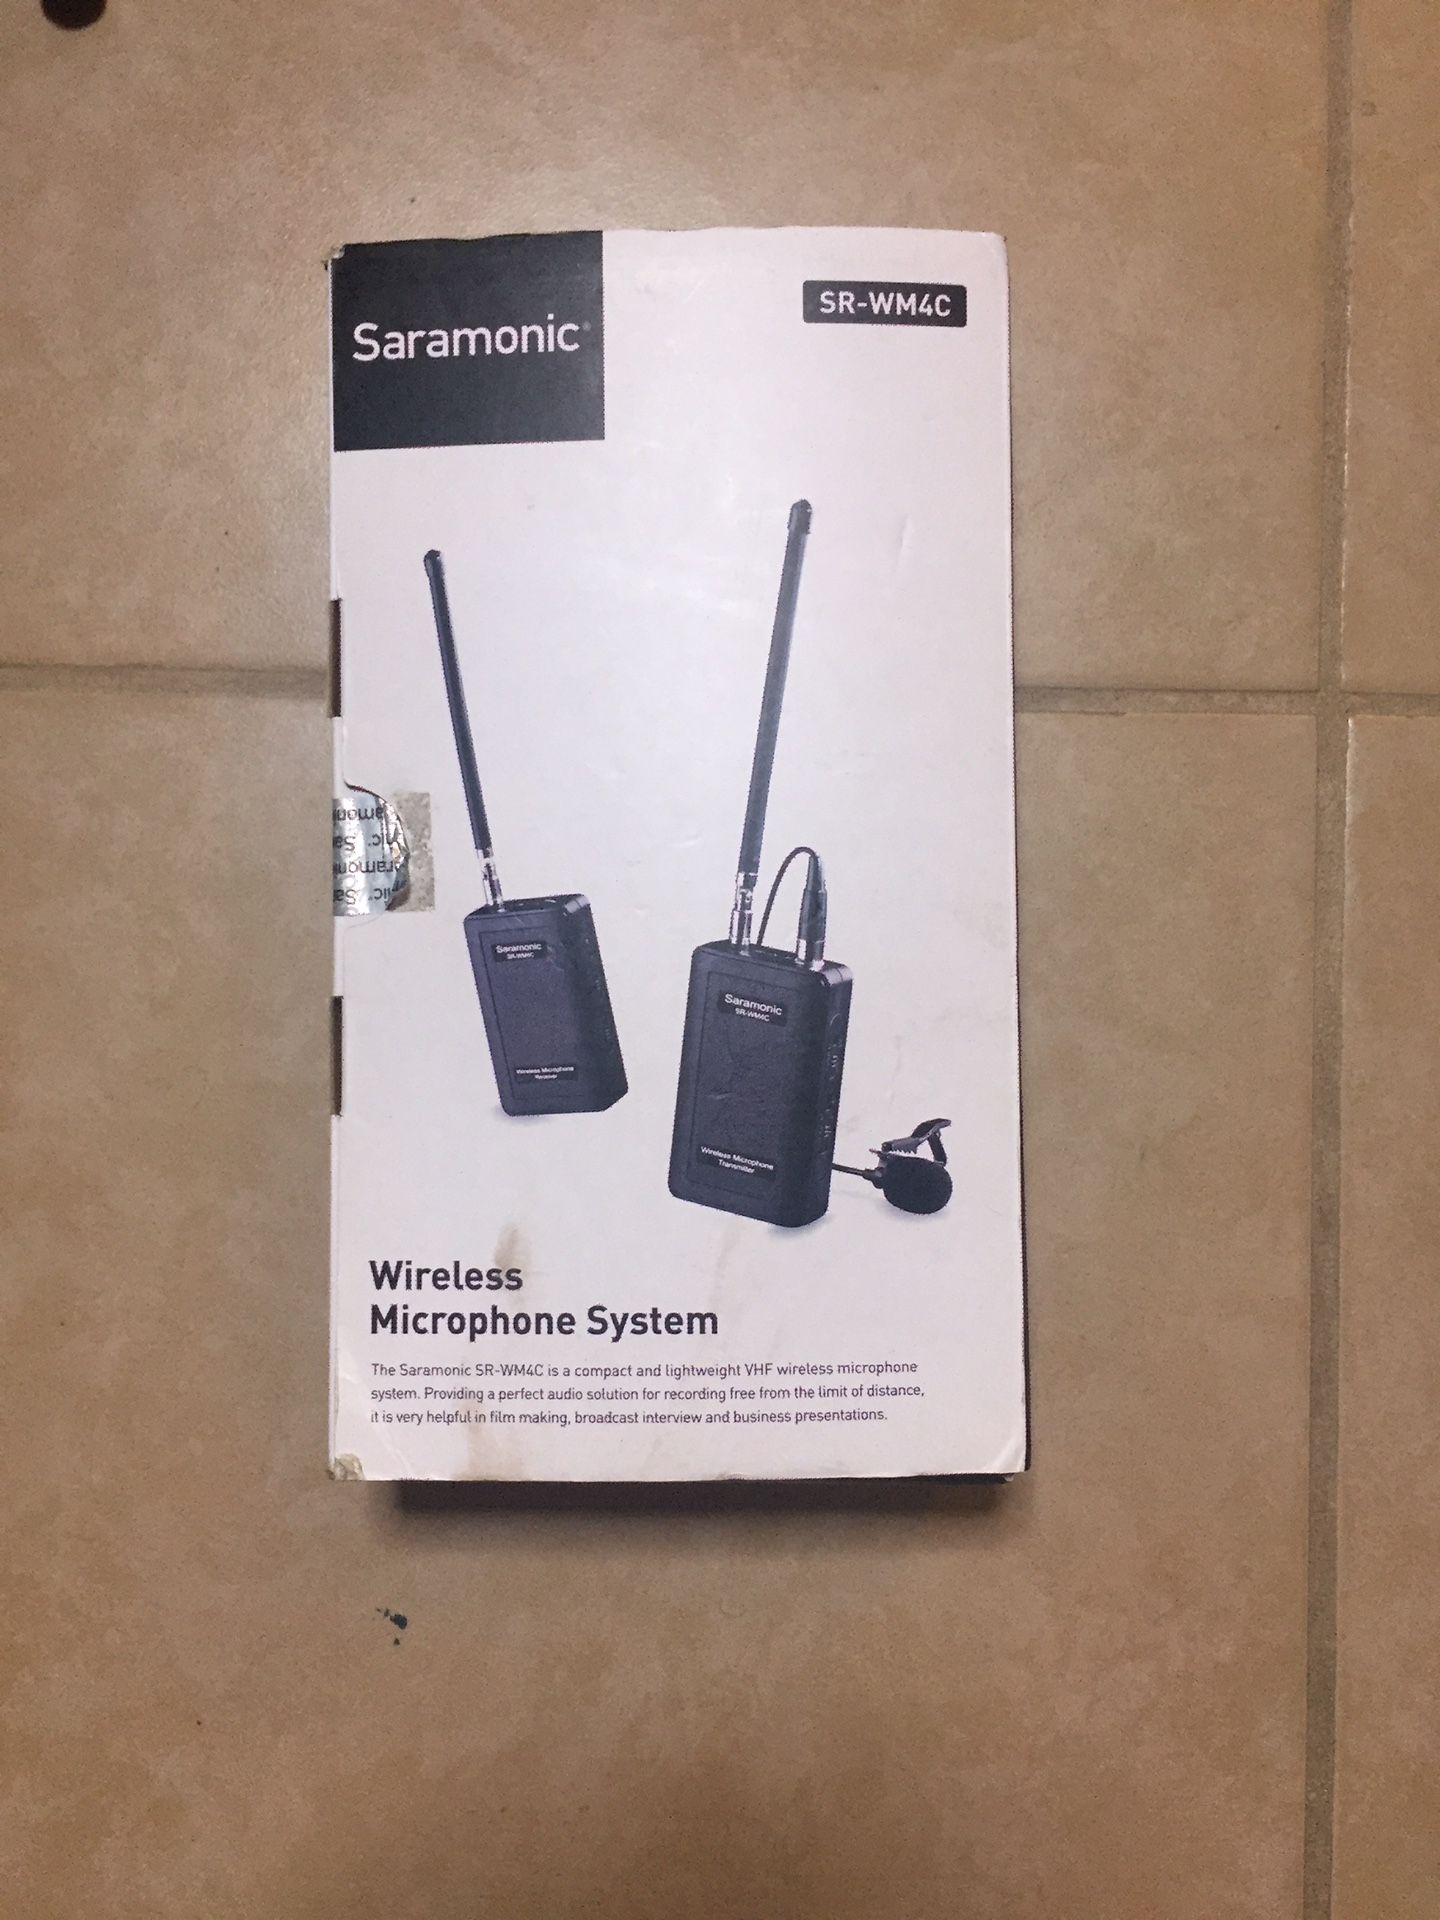 Saramonica wireless microphone for camera dslr and phone